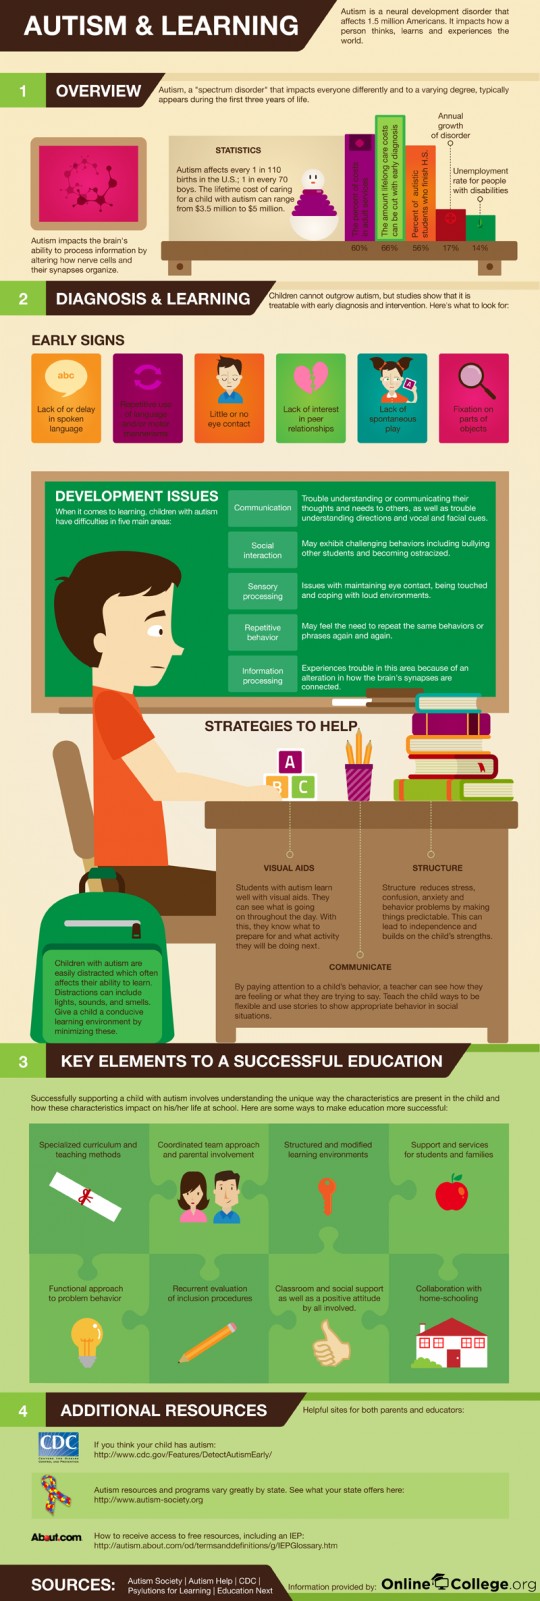 Autism and Learning - Autism speaks How does autism affect a way a person learns? This infographic takes a look at autism and learning.